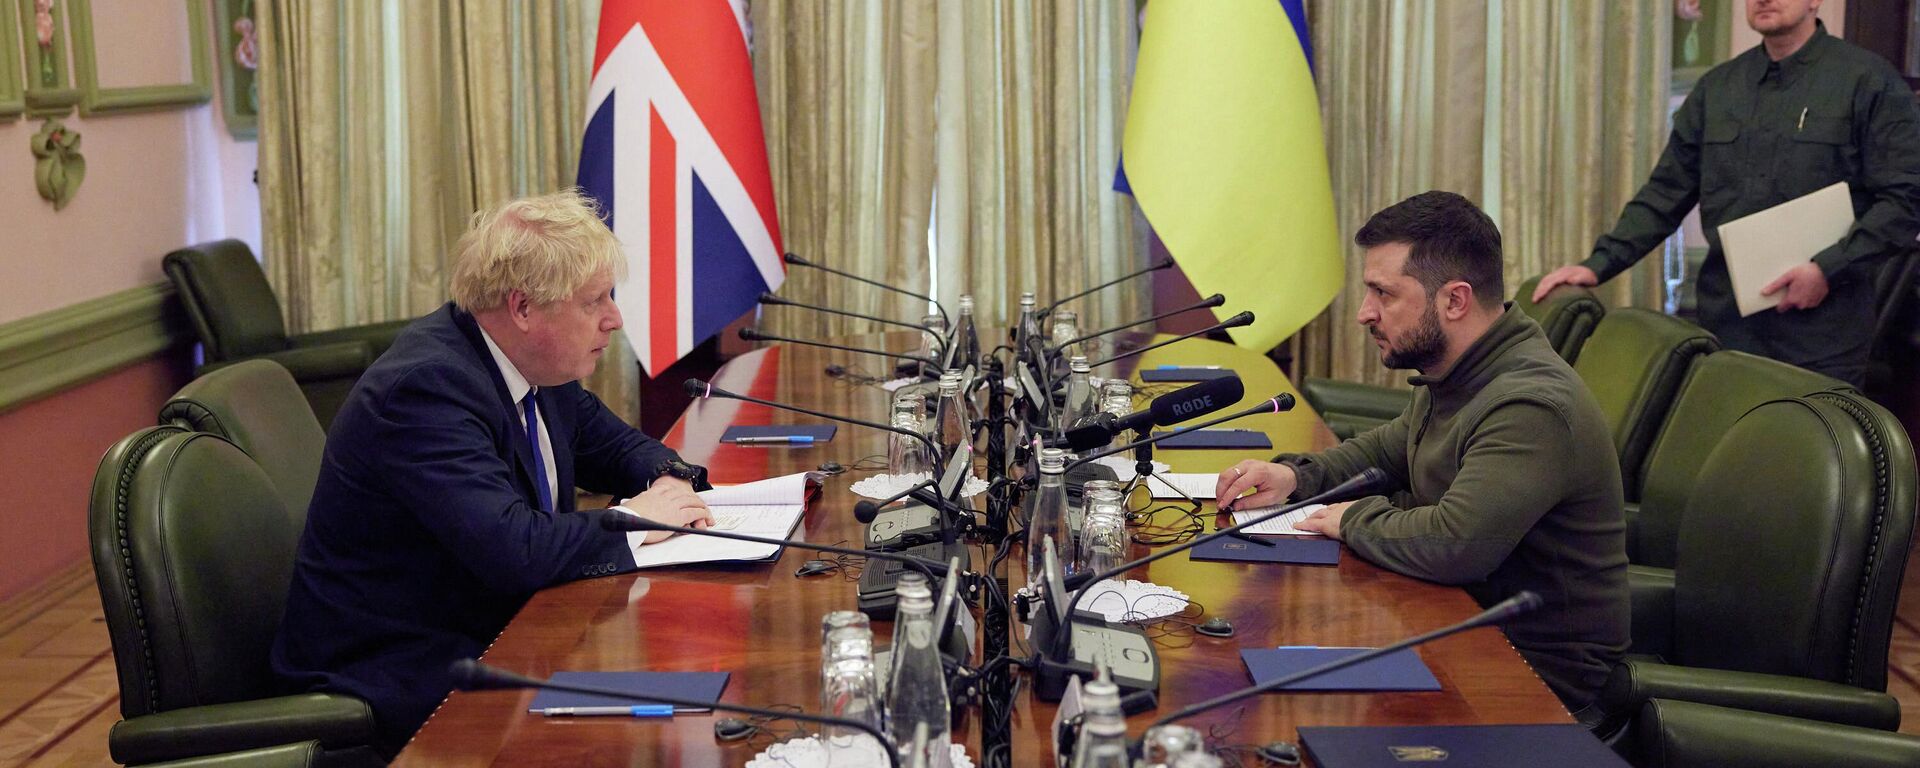 This handout picture taken and released on April 9, 2022 by Ukrainian Presidential Press Service shows Ukrainian President Volodymyr Zelensky (2R) speaking with British Prime Minister Boris Johnson (L) during their meeting in Kiev. - Sputnik International, 1920, 09.04.2022